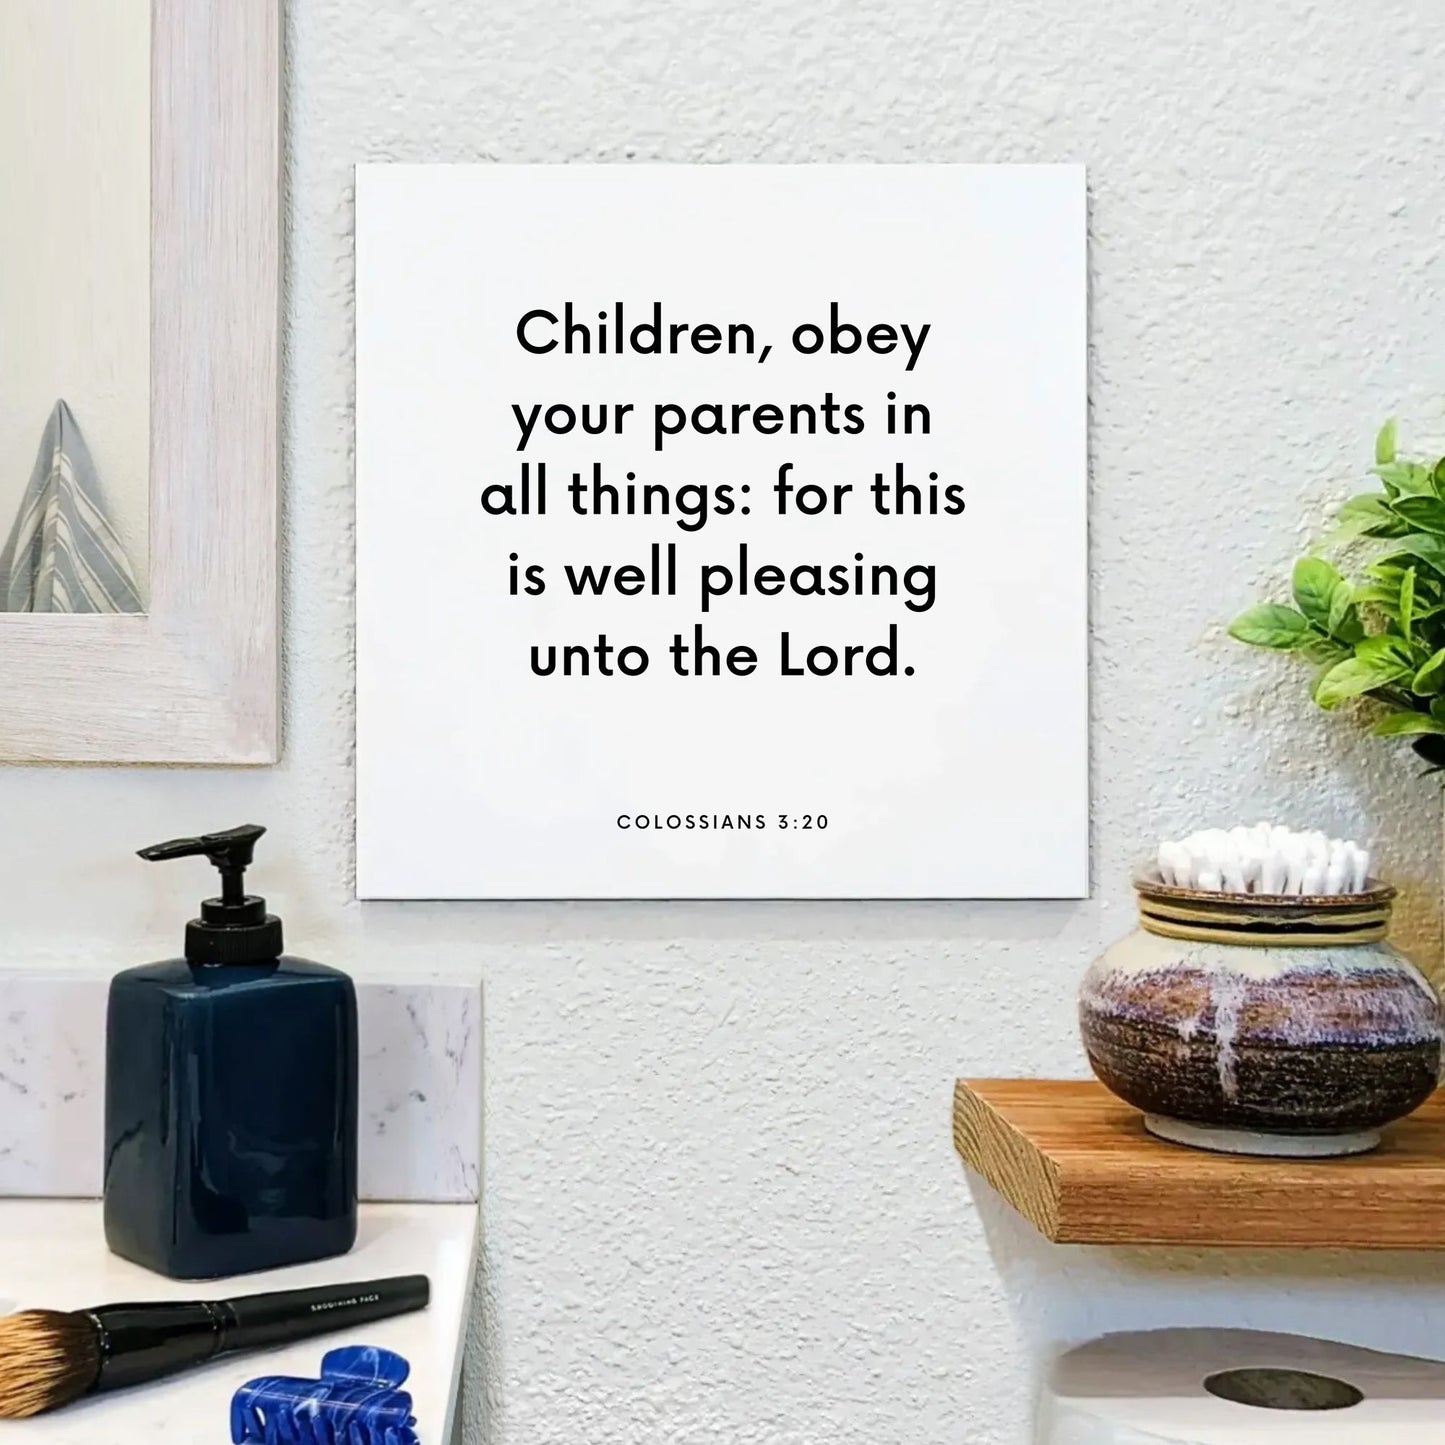 Bathroom mouting of the scripture tile for Colossians 3:20 - "Children, obey your parents in all things"